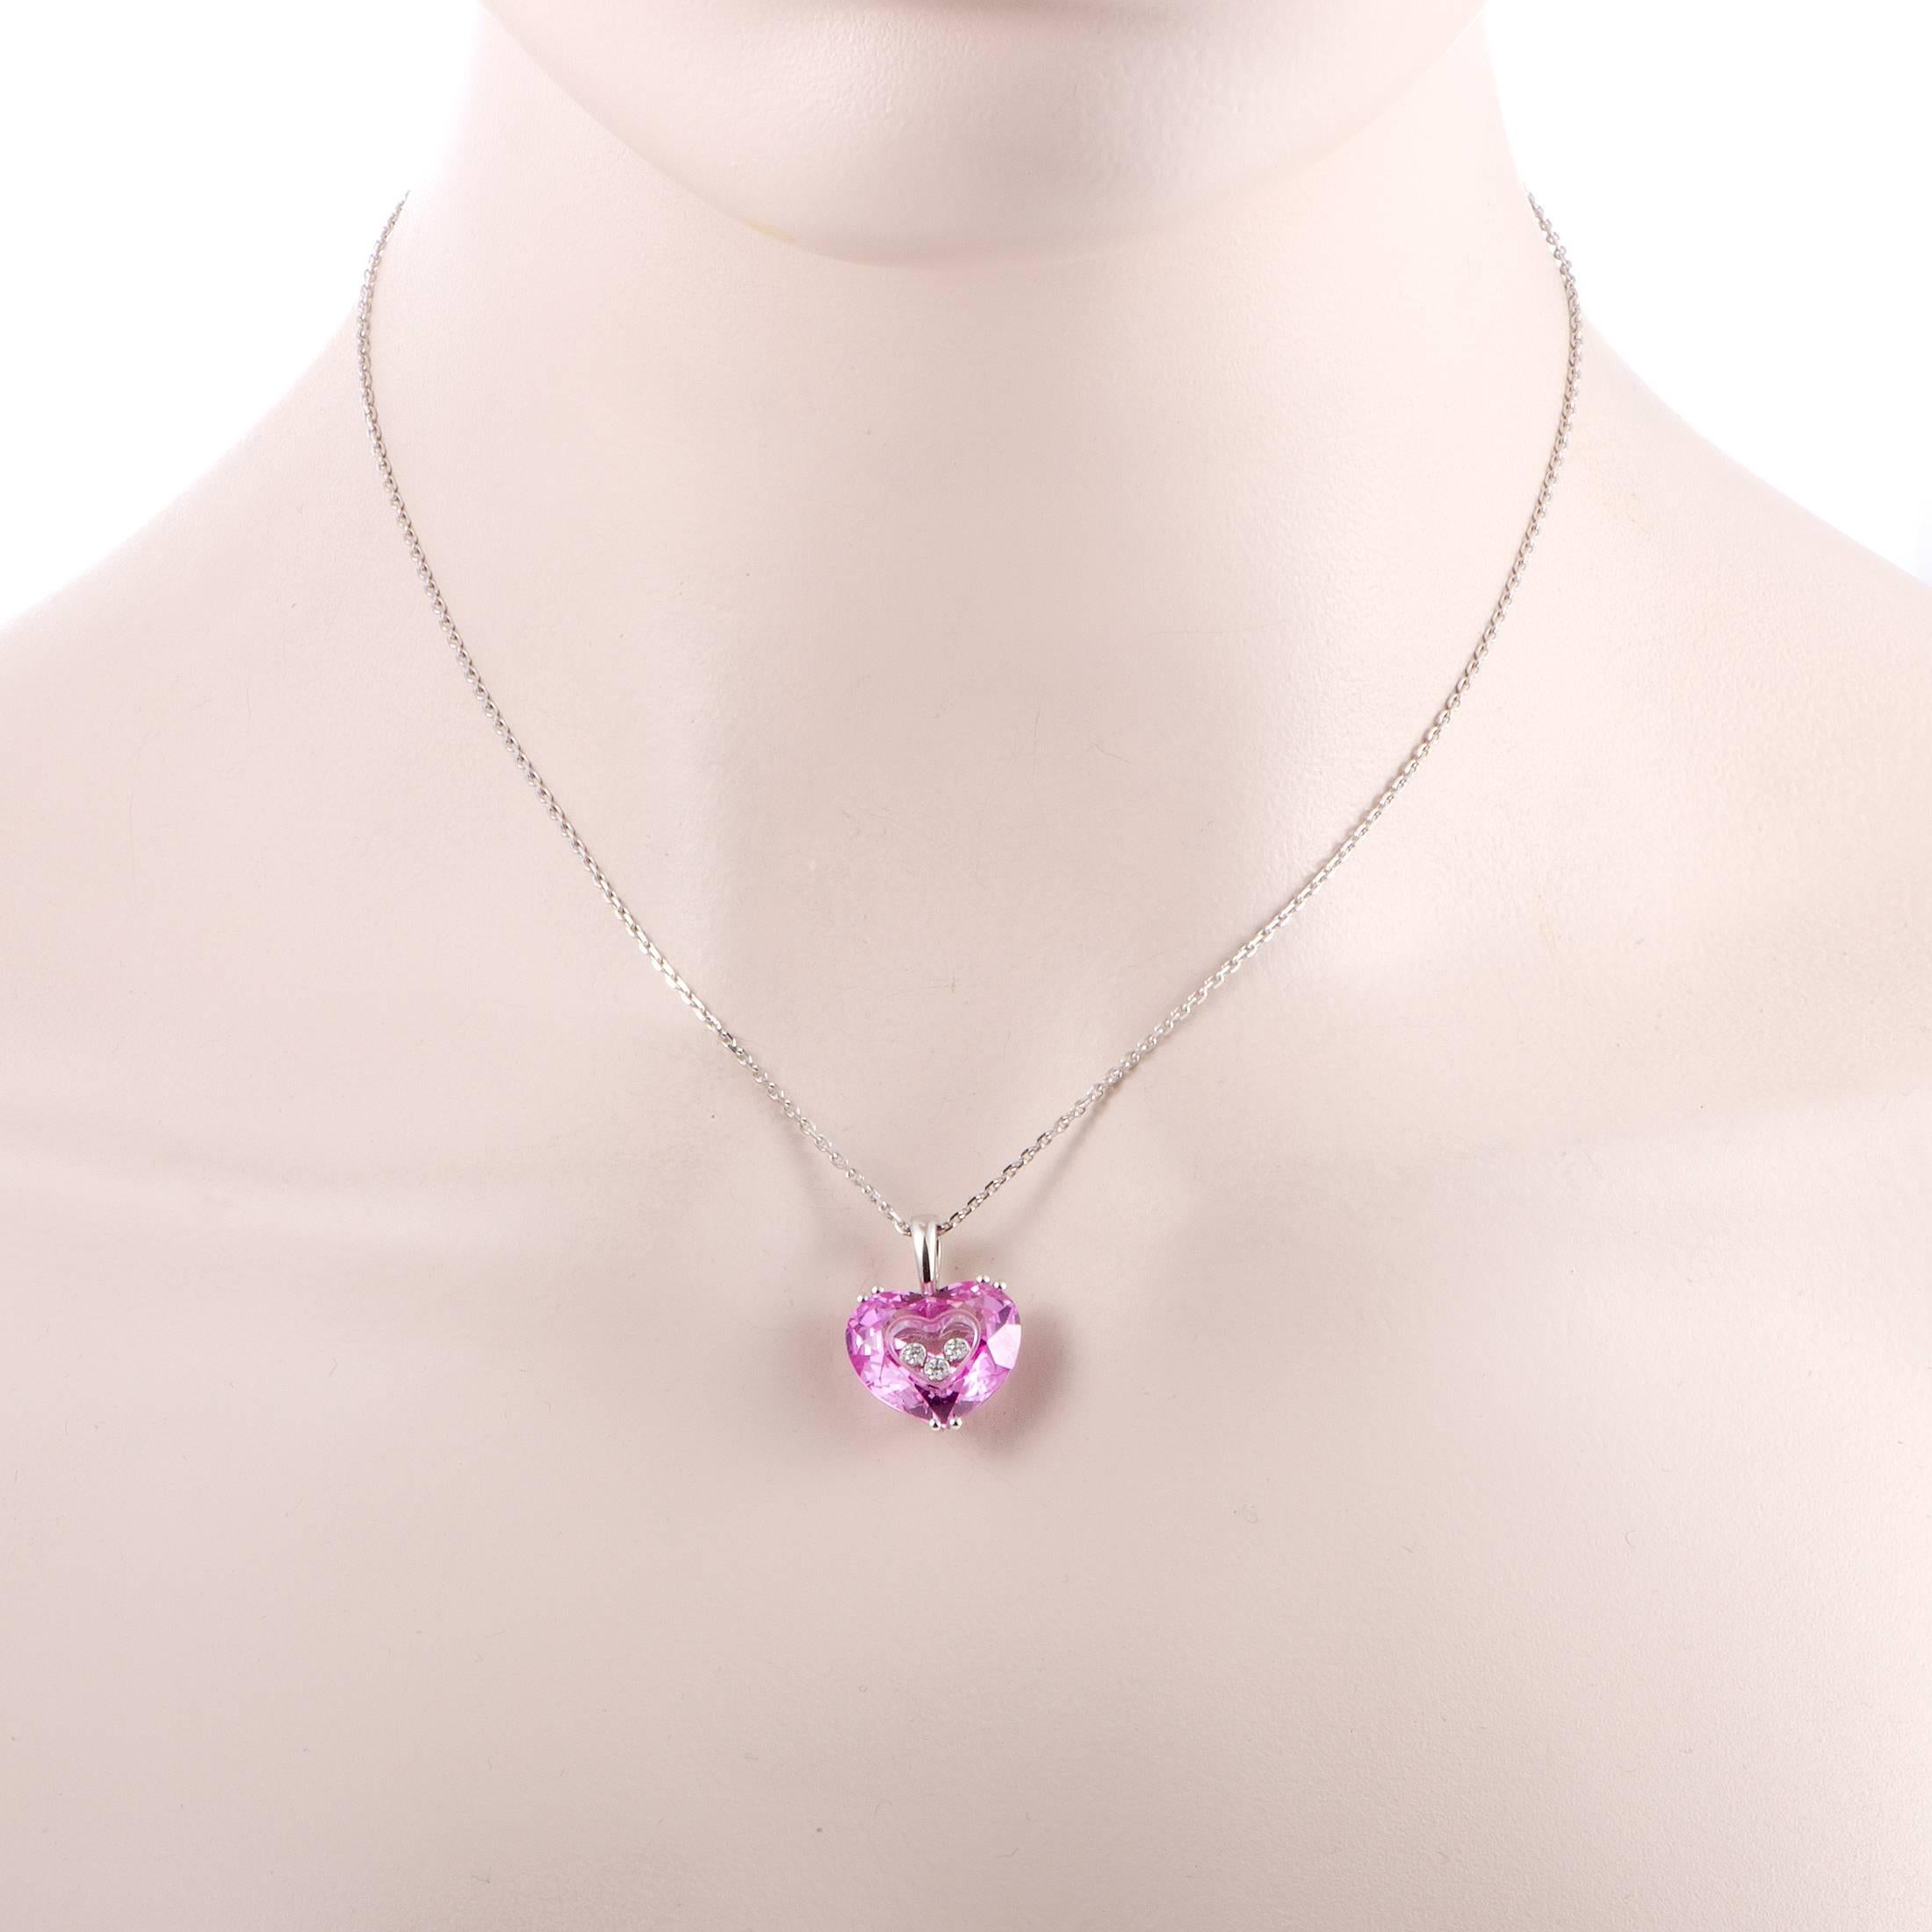 Combining an alluring heart pendant made of gorgeous pink crystal with the brand’s iconic floating diamonds, this remarkable necklace designed by Chopard boasts enchanting feminine appeal. The necklace is made of prestigious 18K white gold and